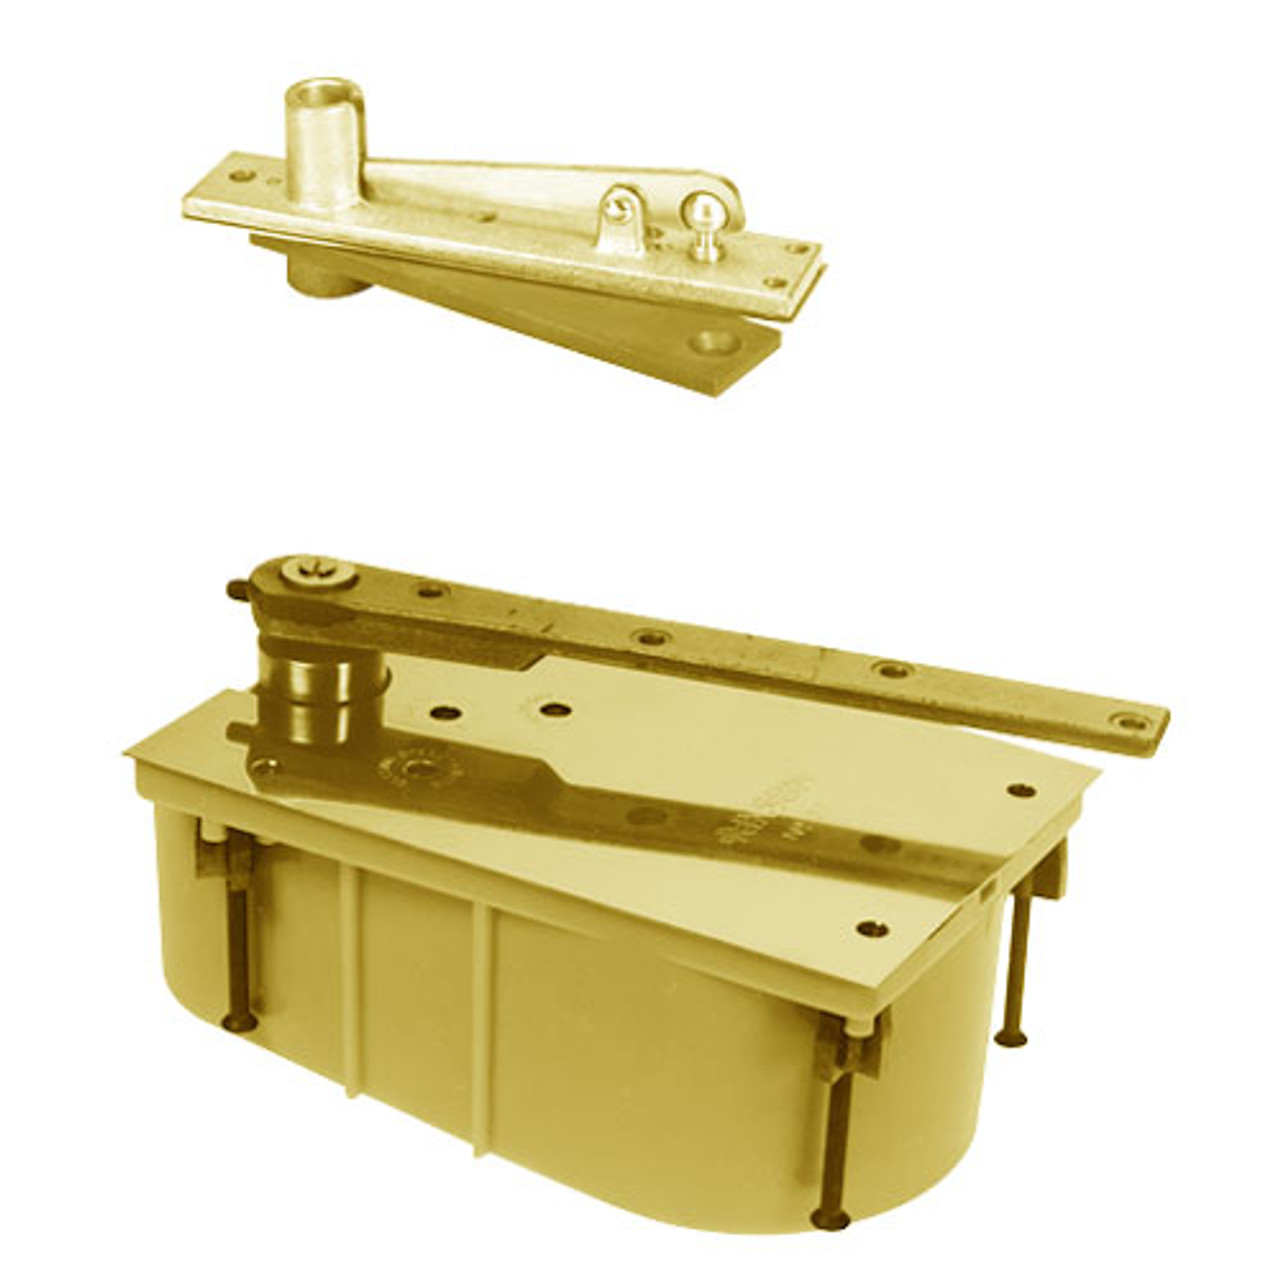 PH28-85N-554-CWF-LH-605 Rixson 28 Series Heavy Duty Single Acting Center Hung Floor Closer with Concealed Arm in Bright Brass Finish